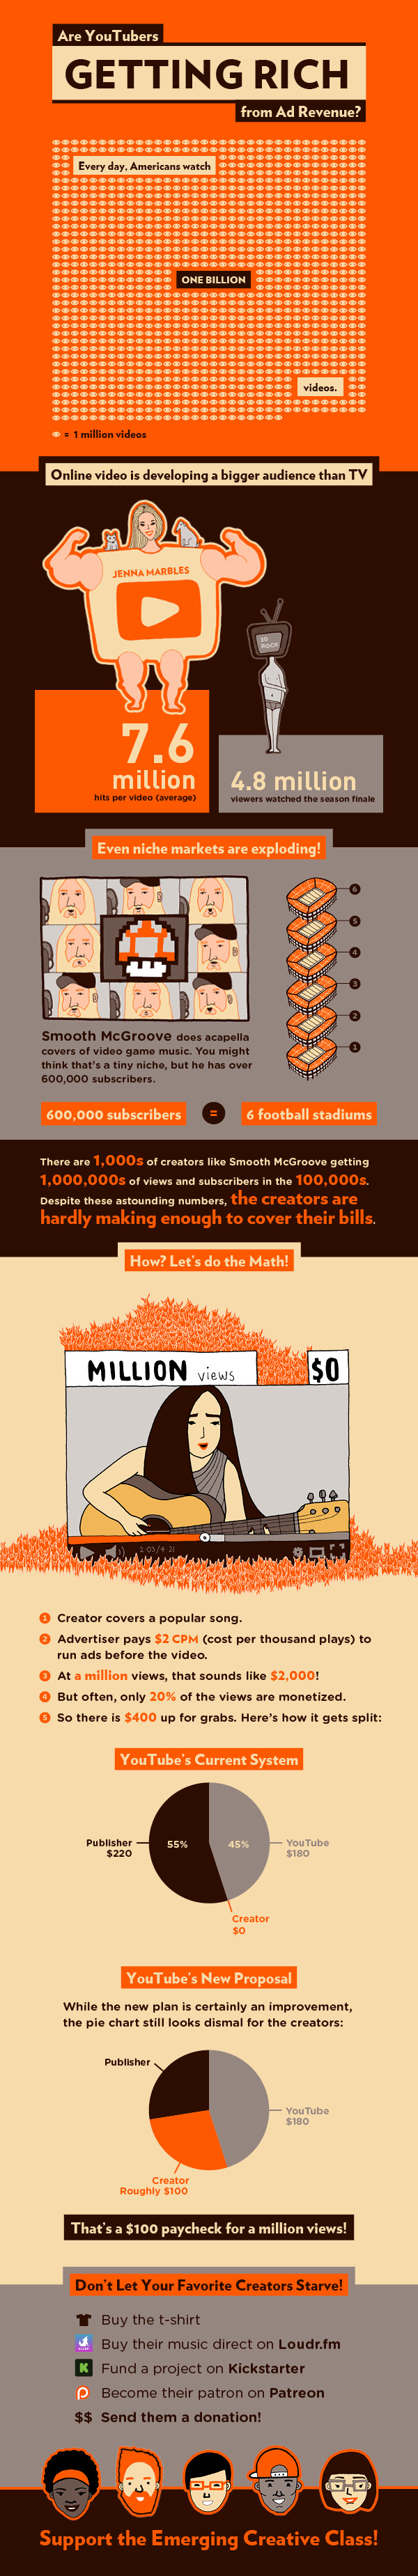 Are Youtubers Getting Rich From Ad Revenue #infographic